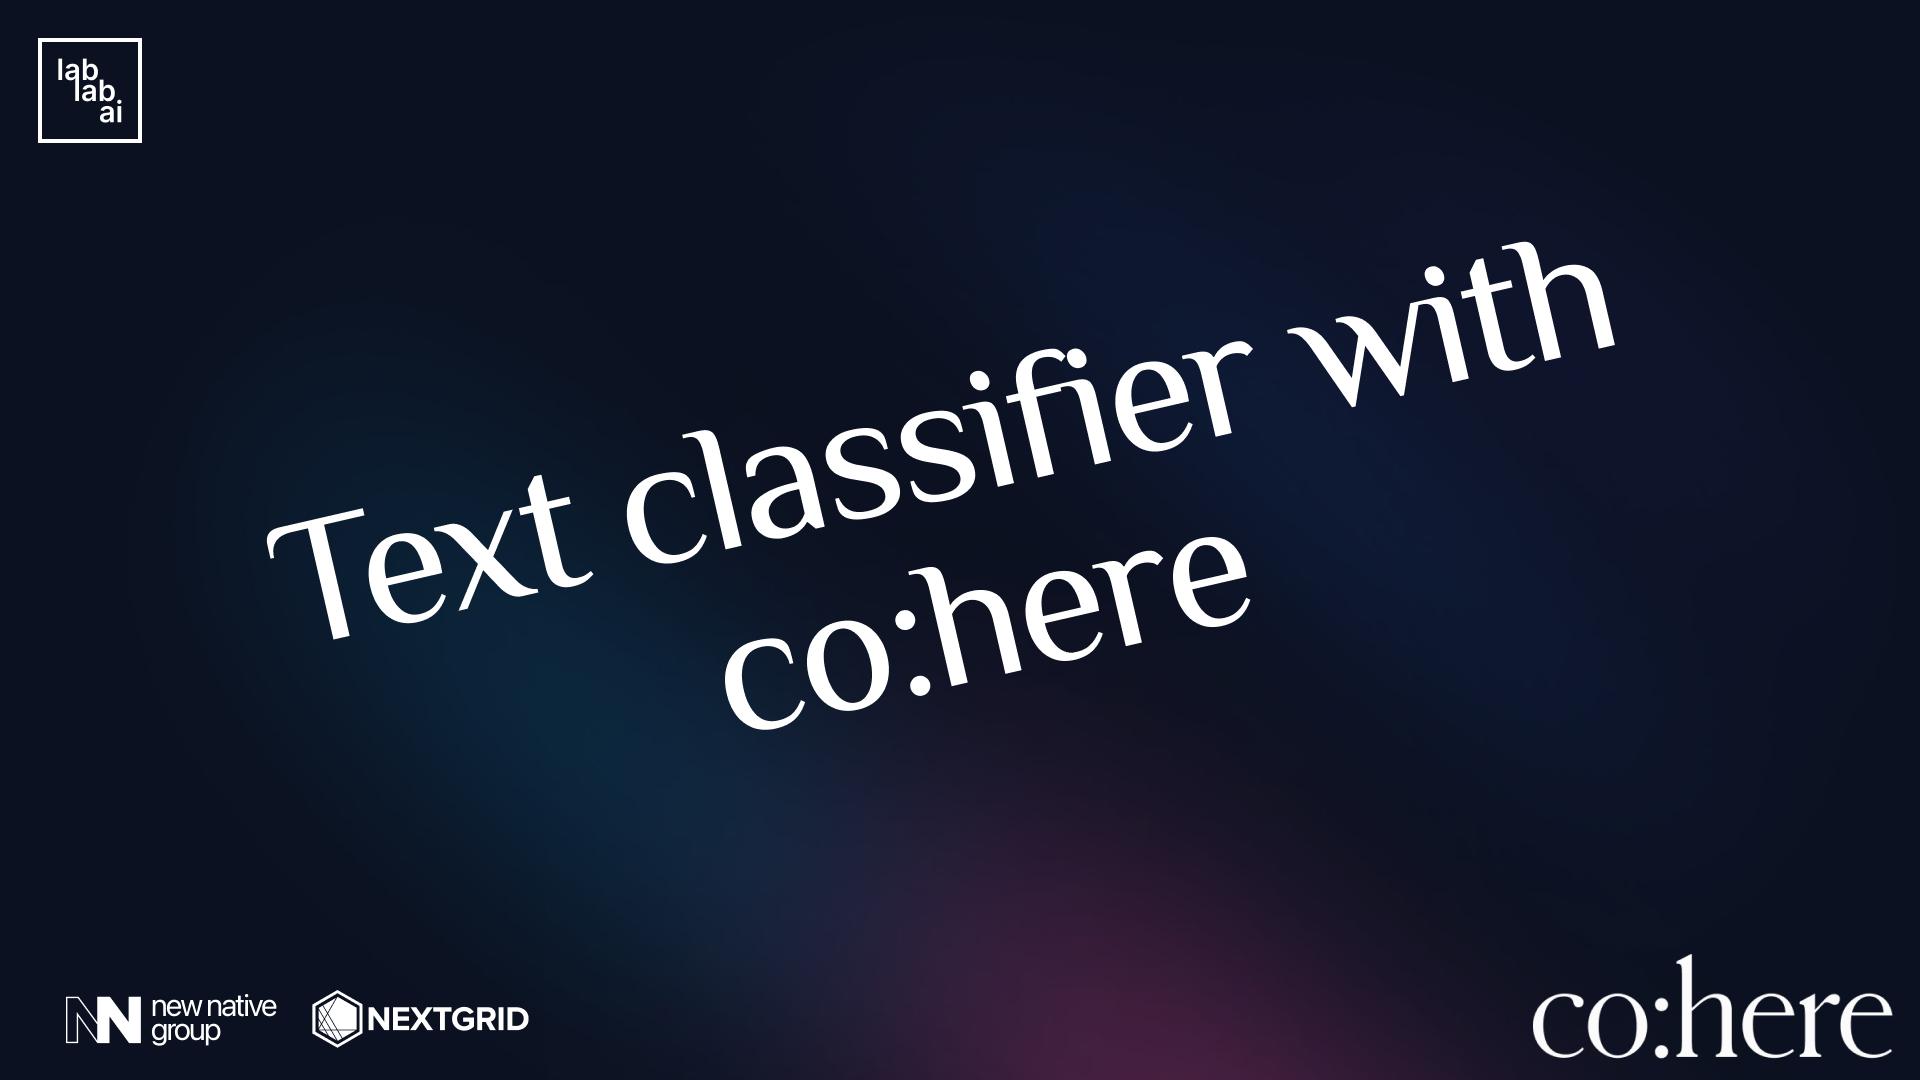 Cohere tutorial: Text classifier with Cohere